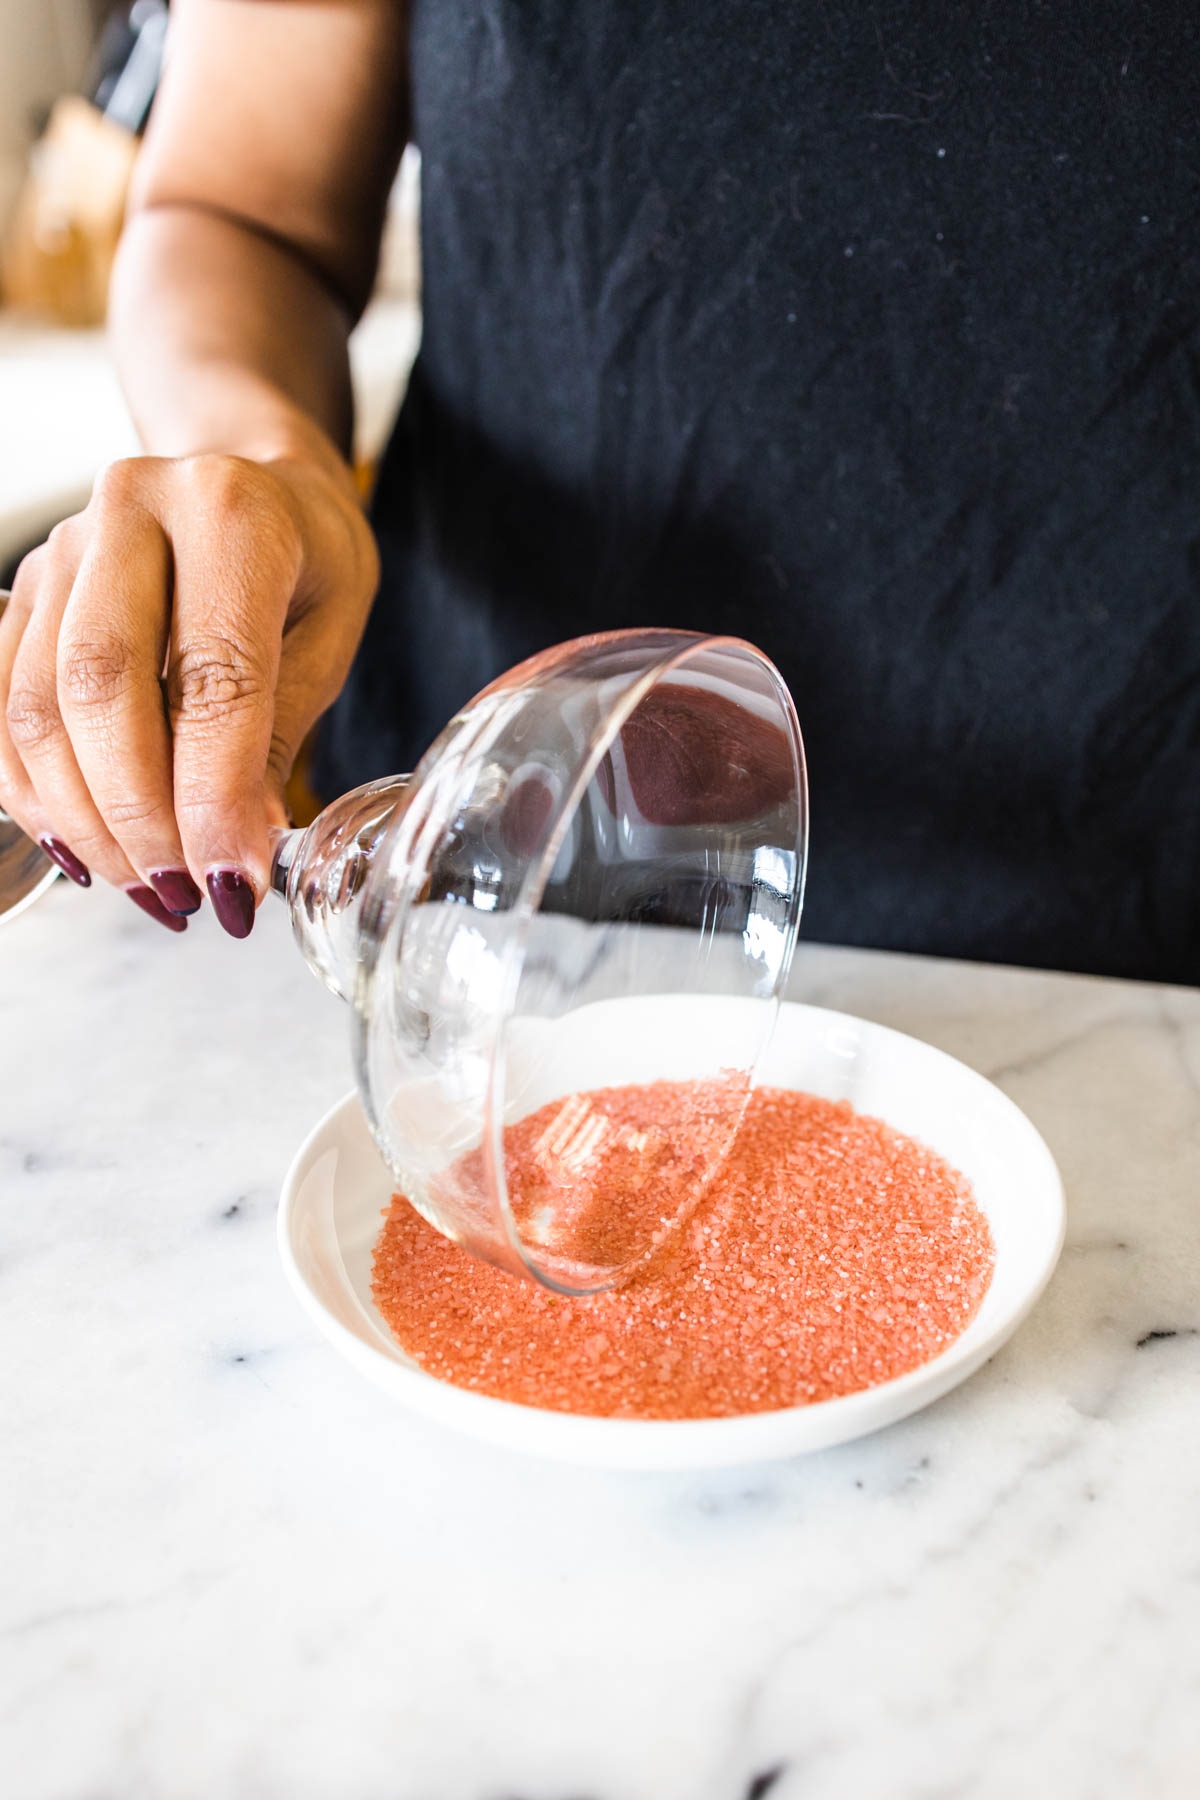 A woman dipping a portion of the margarita glass on a small plate with grapefruit-flavored kosher salt.